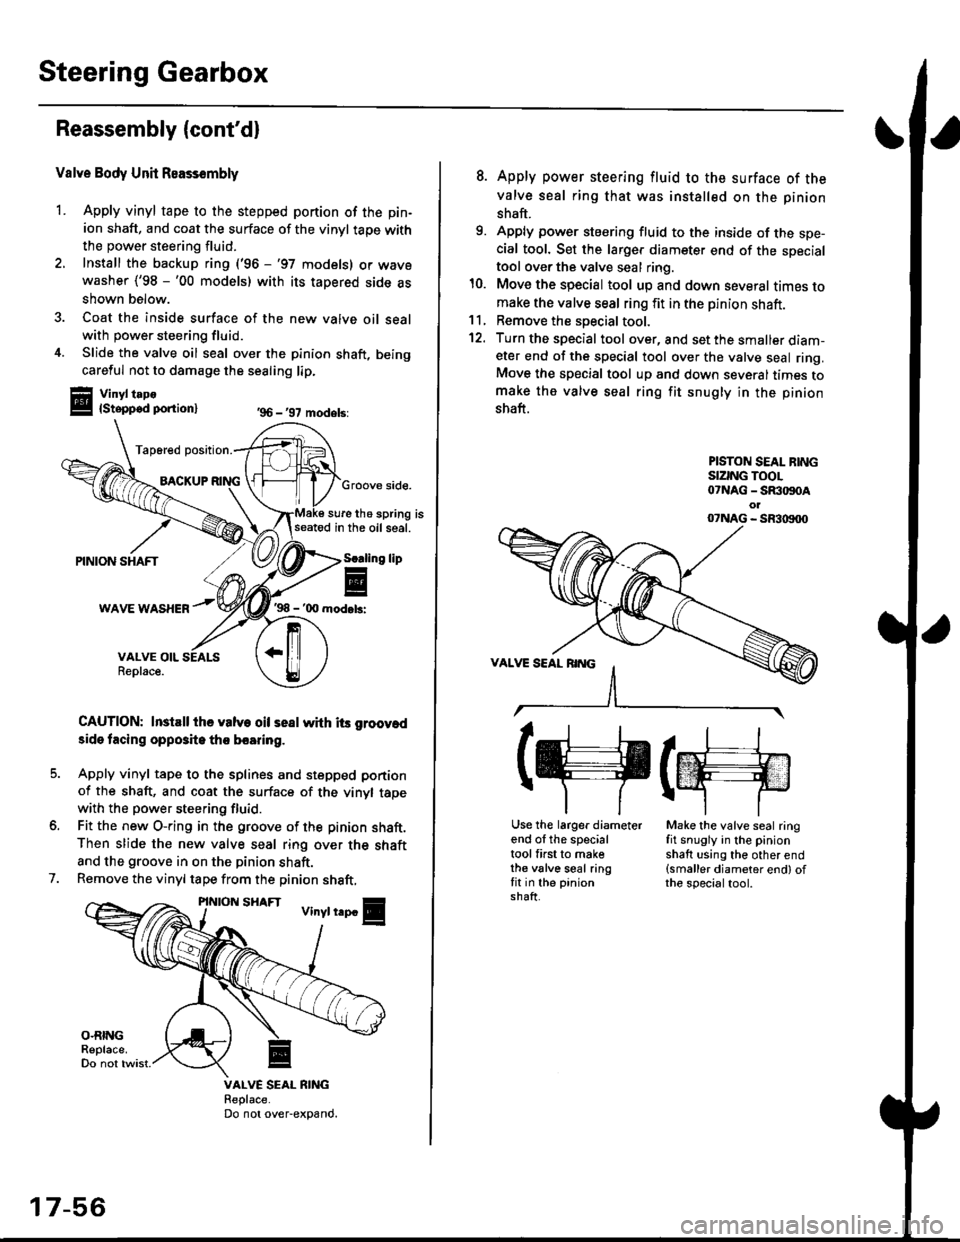 HONDA CIVIC 1997 6.G User Guide Steering Gearbox
Reassembly (contd)
Valve Body Unit Reassembly
1. Apply vinyl tape to the stepped portion of the pin-
ion shaft, and coat the surface of the vinyl taoe with
the power steering fluid.
